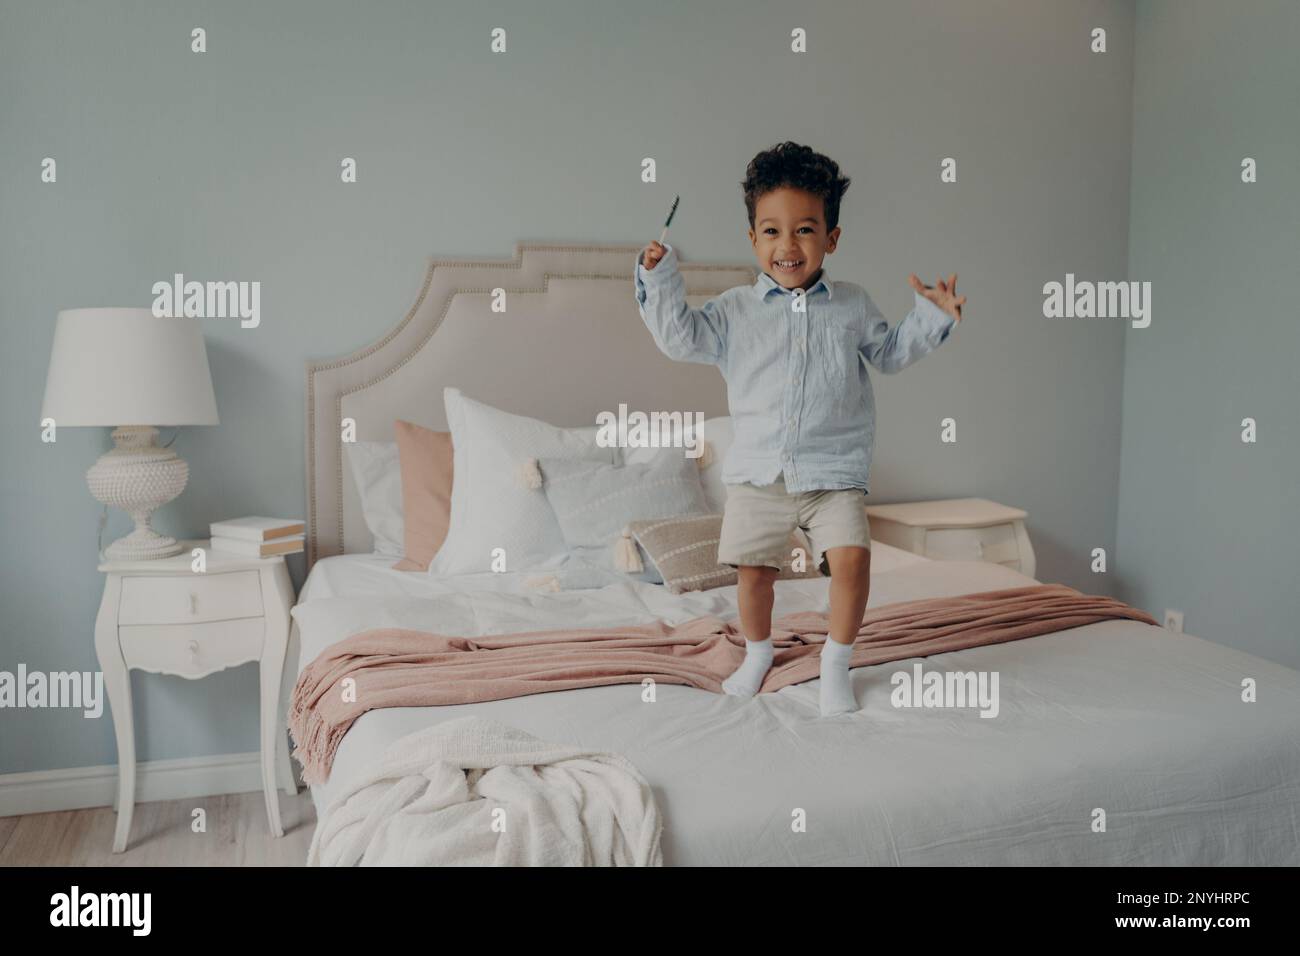 Joyful small mixed race boy happy kid dressed in blue shirt and beige shorts jumping on big comfy bed with candy, expressing his happiness with shinin Stock Photo